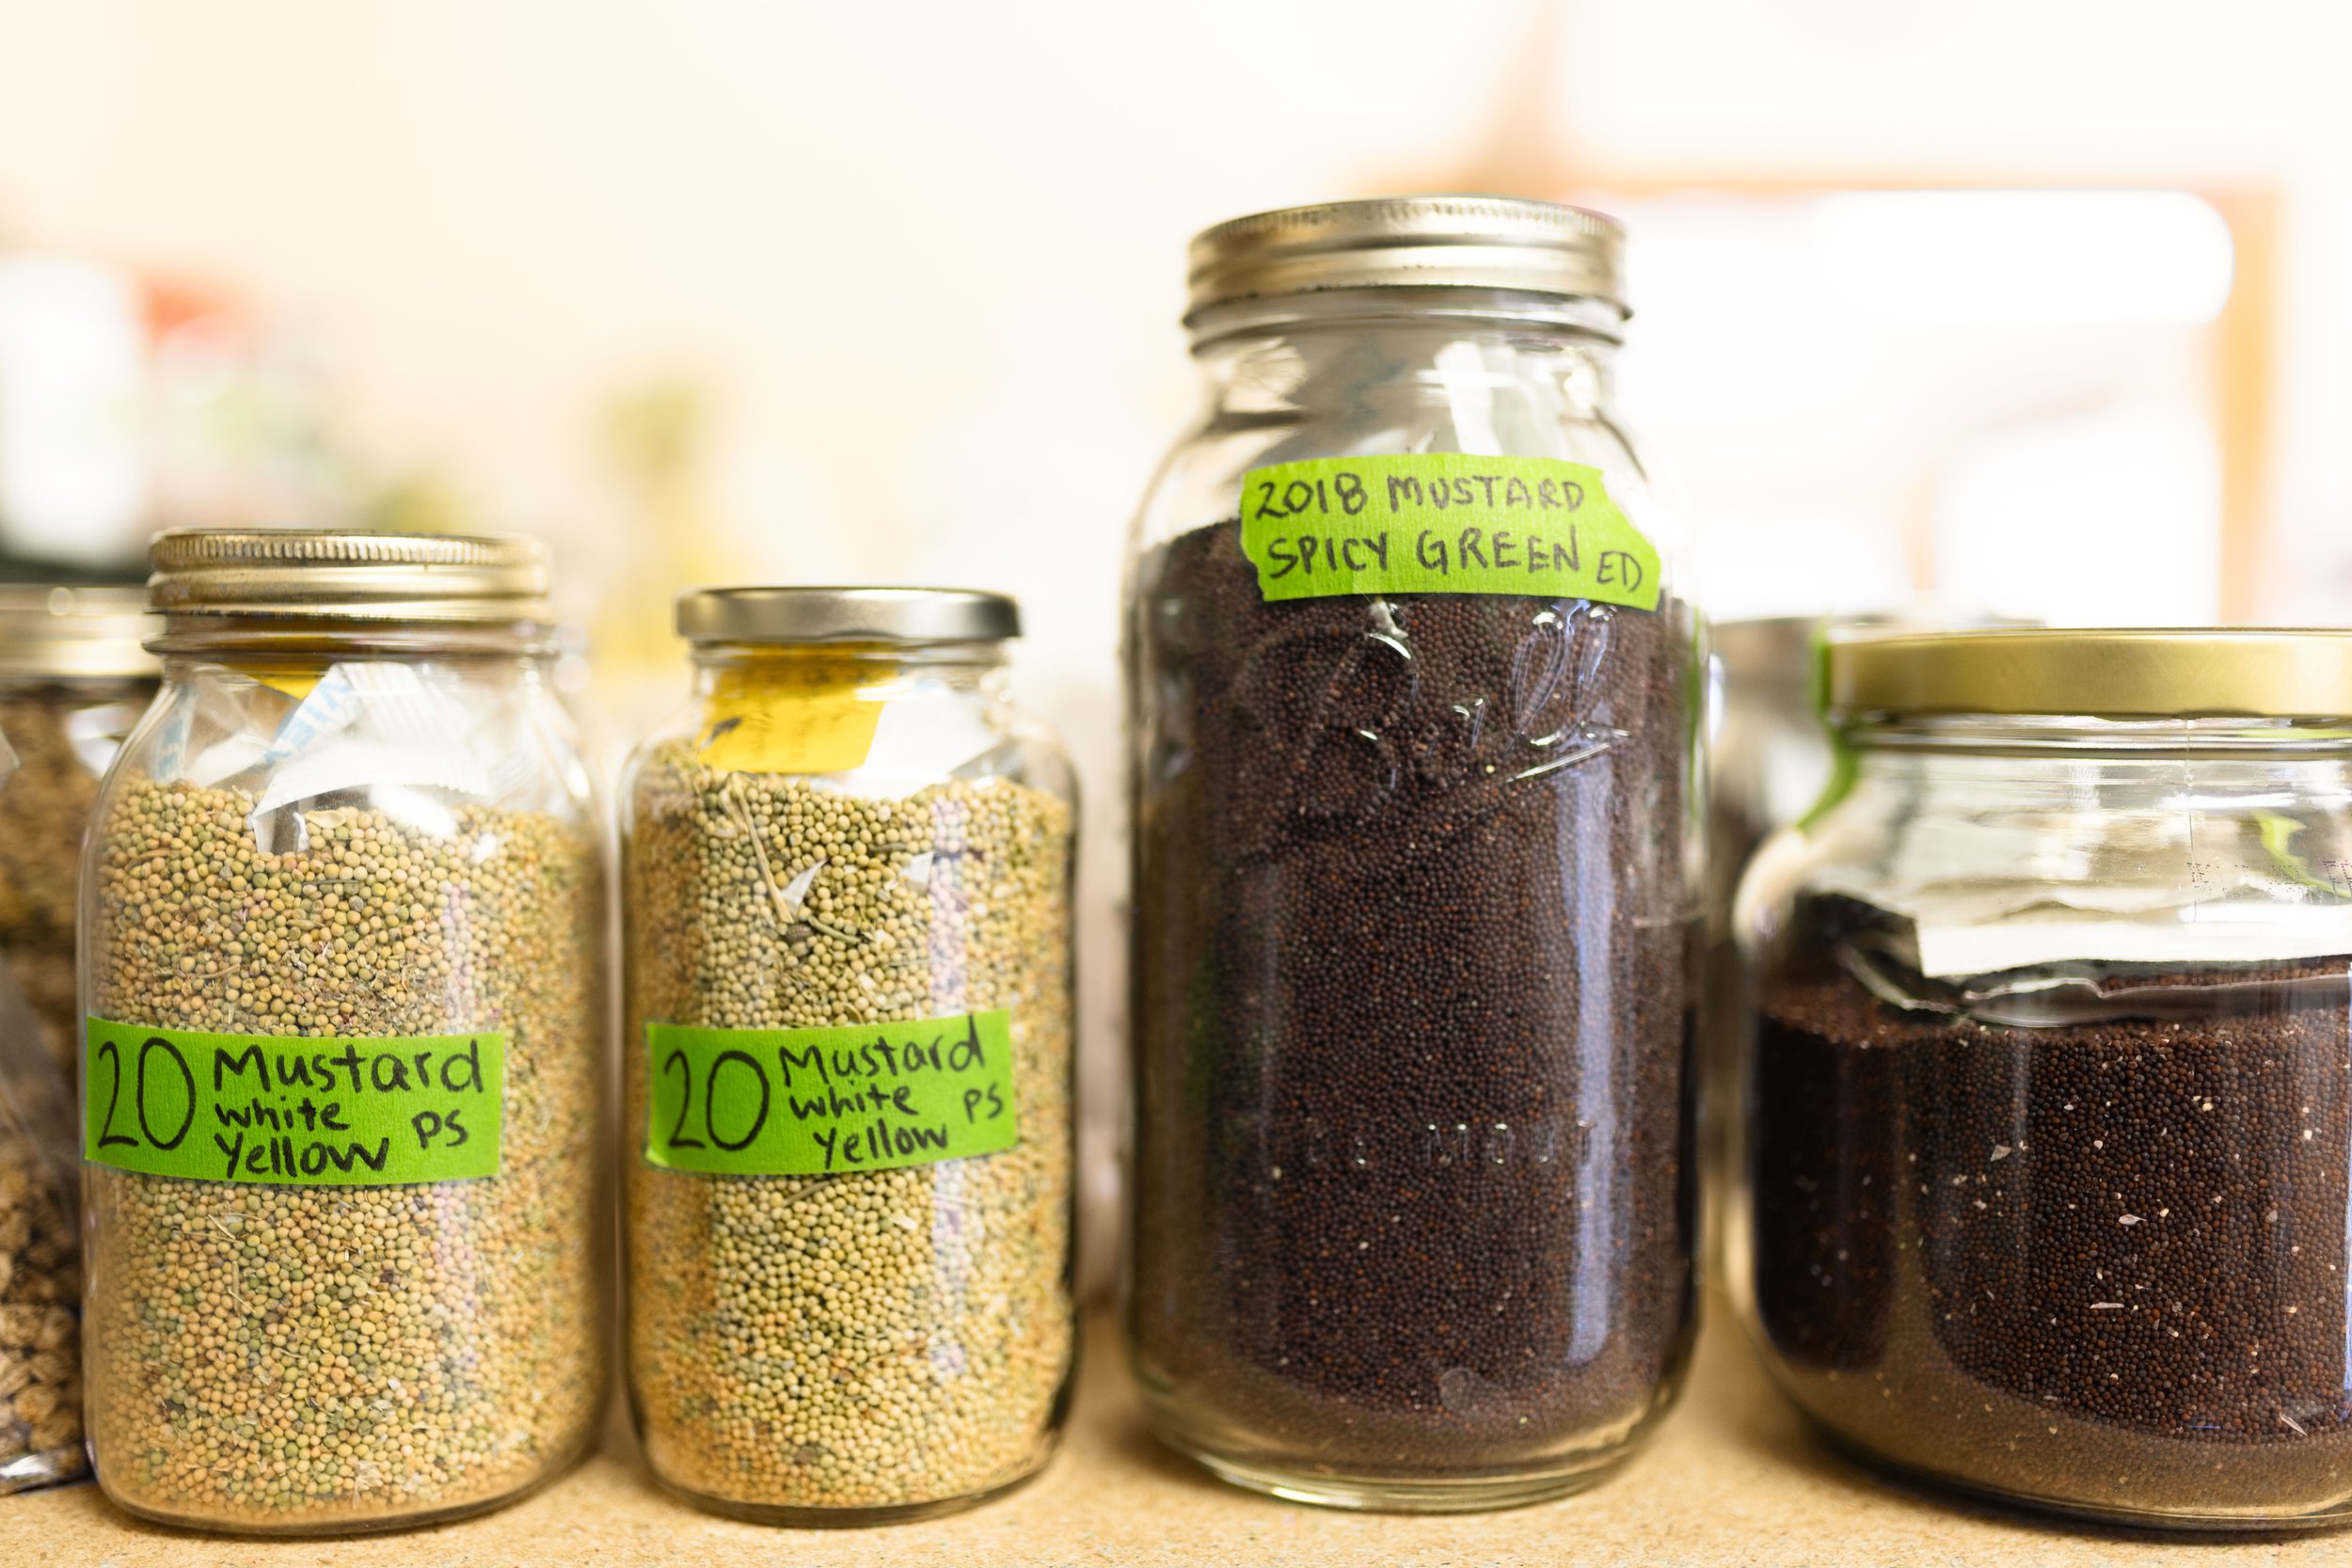  The co-op provides seeds for vegetables, herbs, flowers, grains and greens, like these varieties of mustard. 